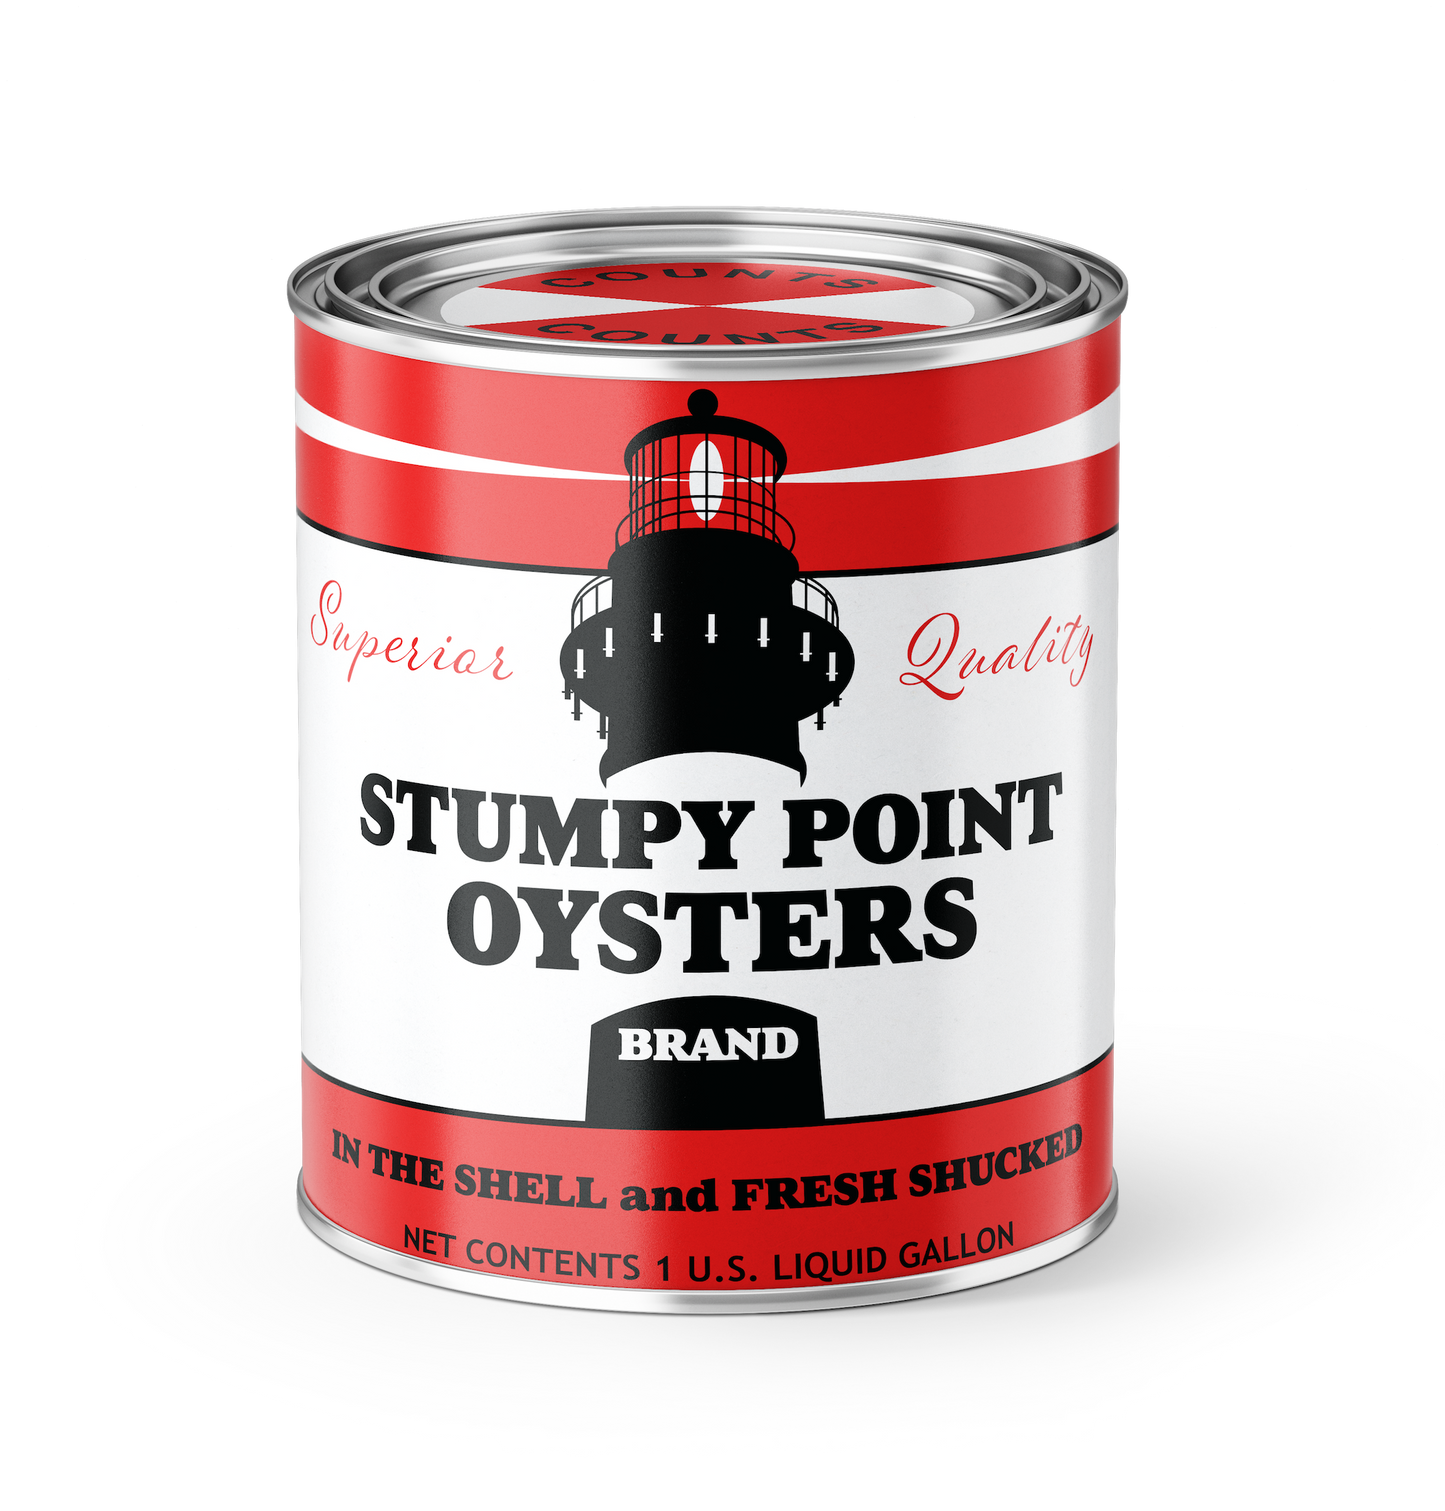 Vintage Stumpy Point Oyster Candle